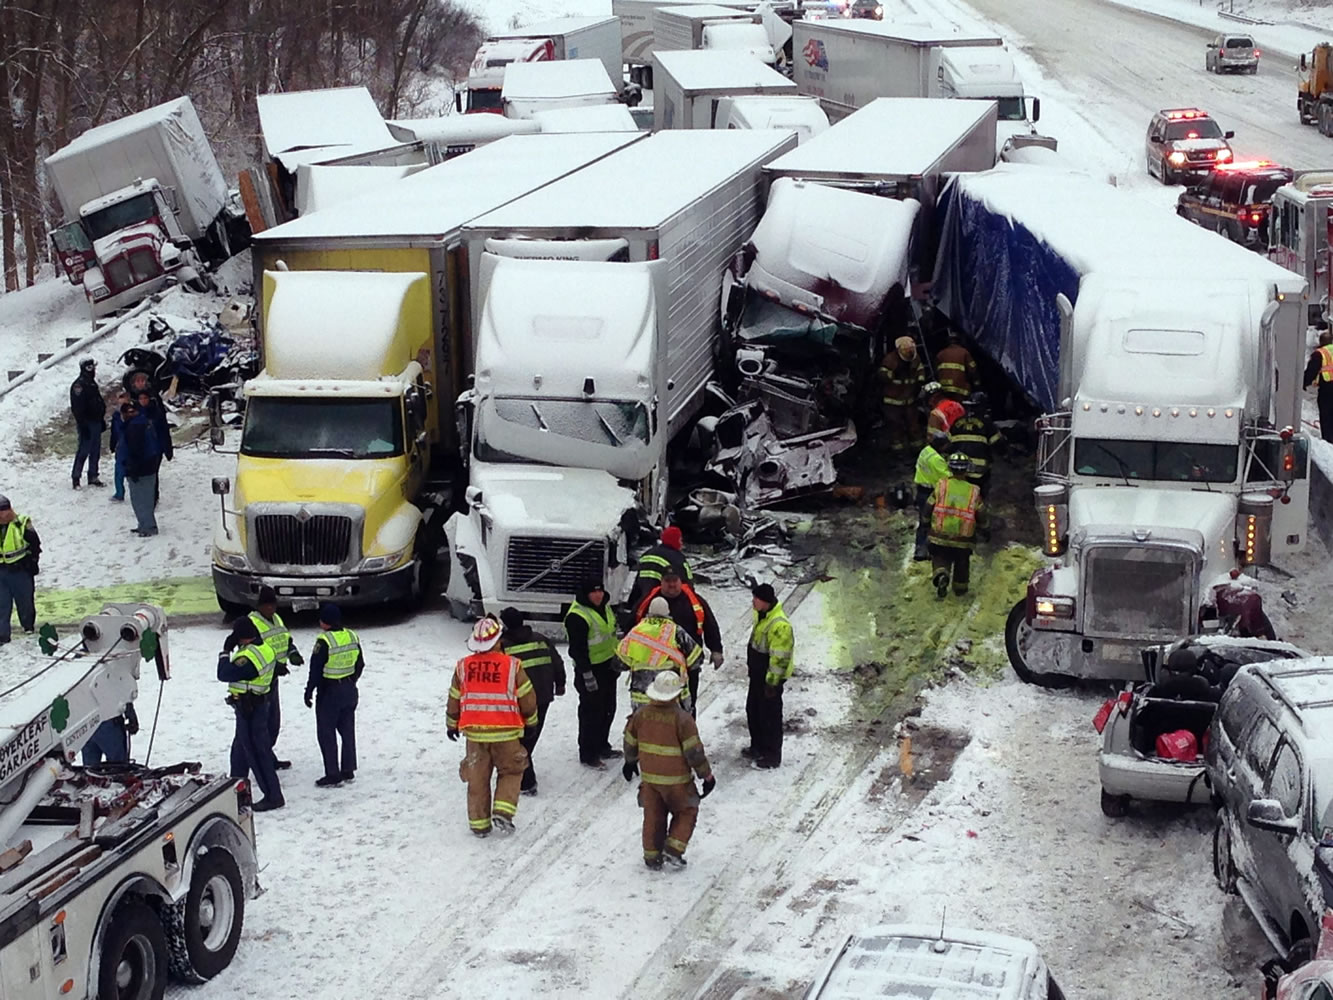 Emergency crews work Thursday afternoon at a massive pileup involving more than 40 vehicles, many of them semitrailers, on Interstate 94 near Michigan City, Ind.